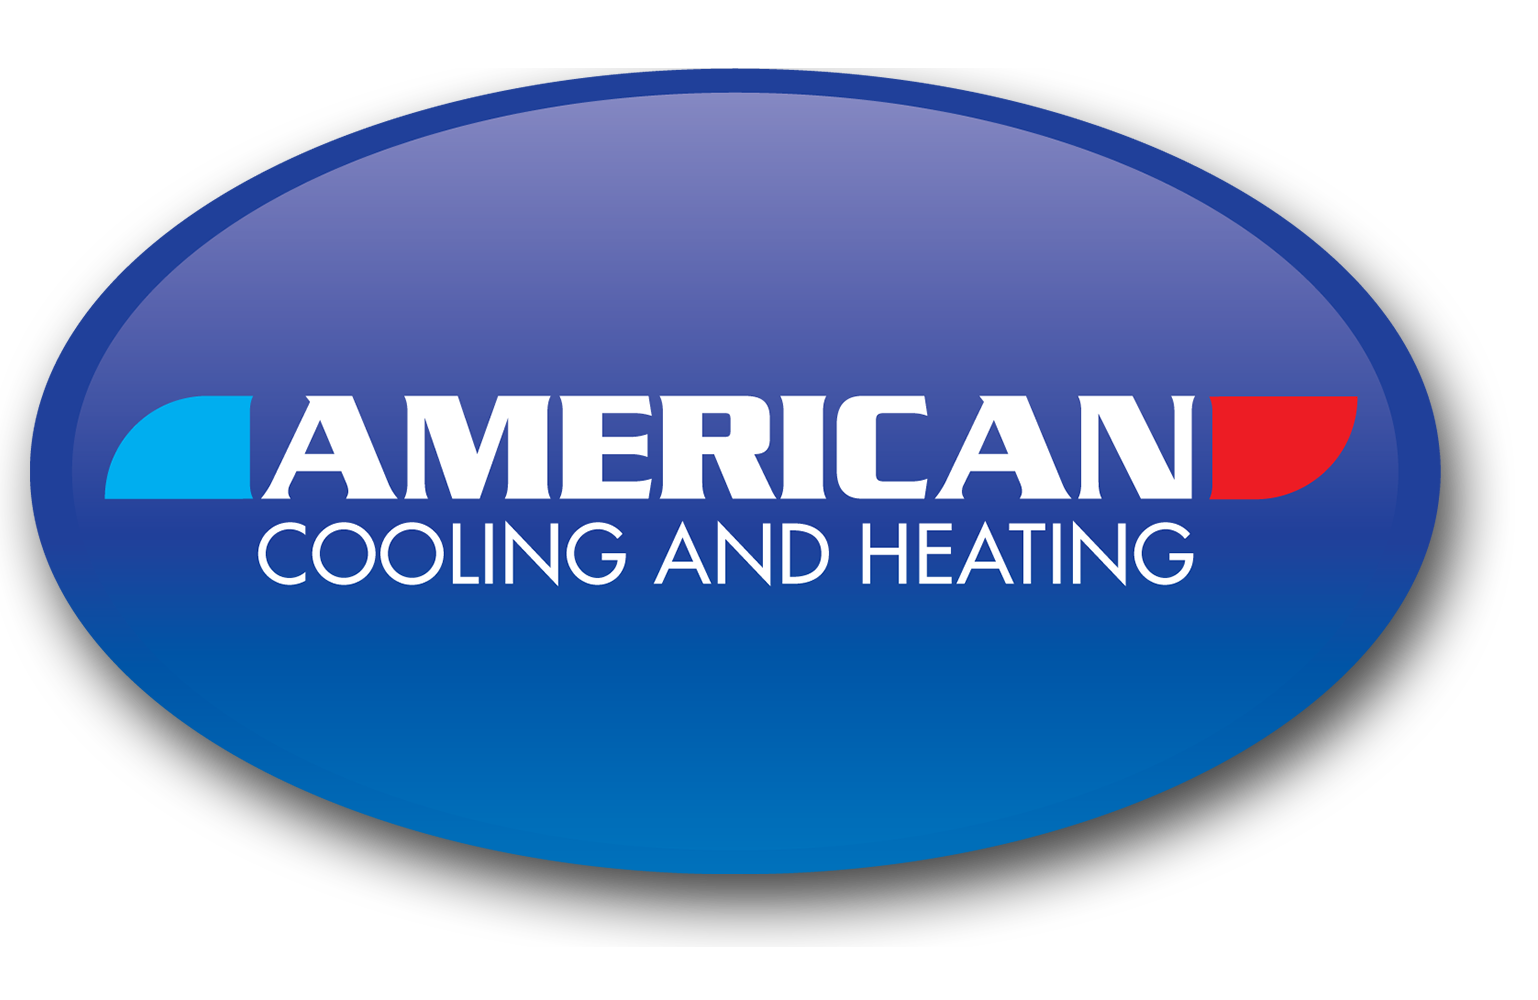 American Cooling and Heating